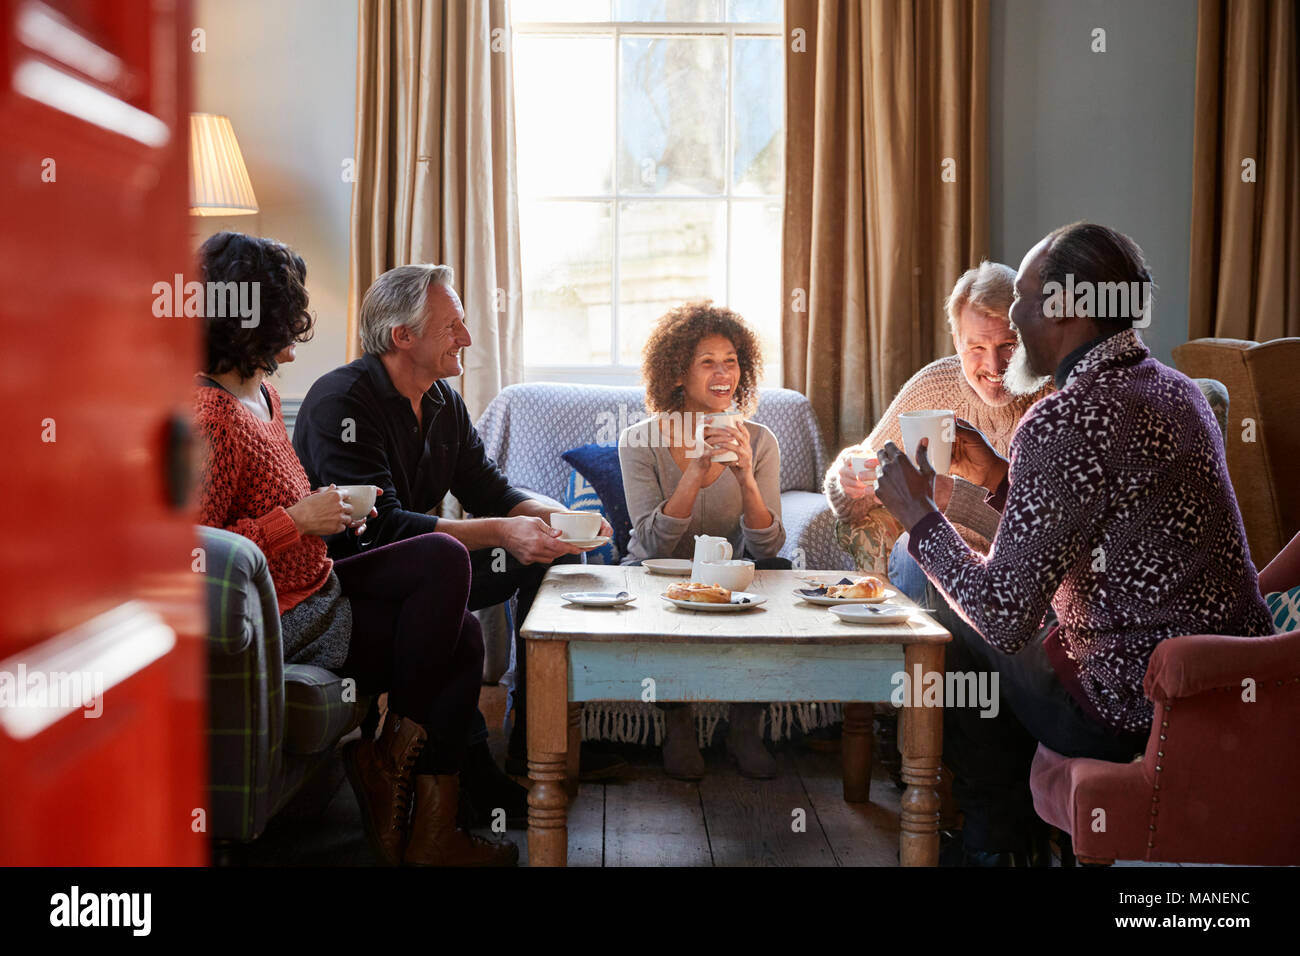 Group Of Middle Aged Friends Meeting Around Table In Coffee Shop Stock Photo